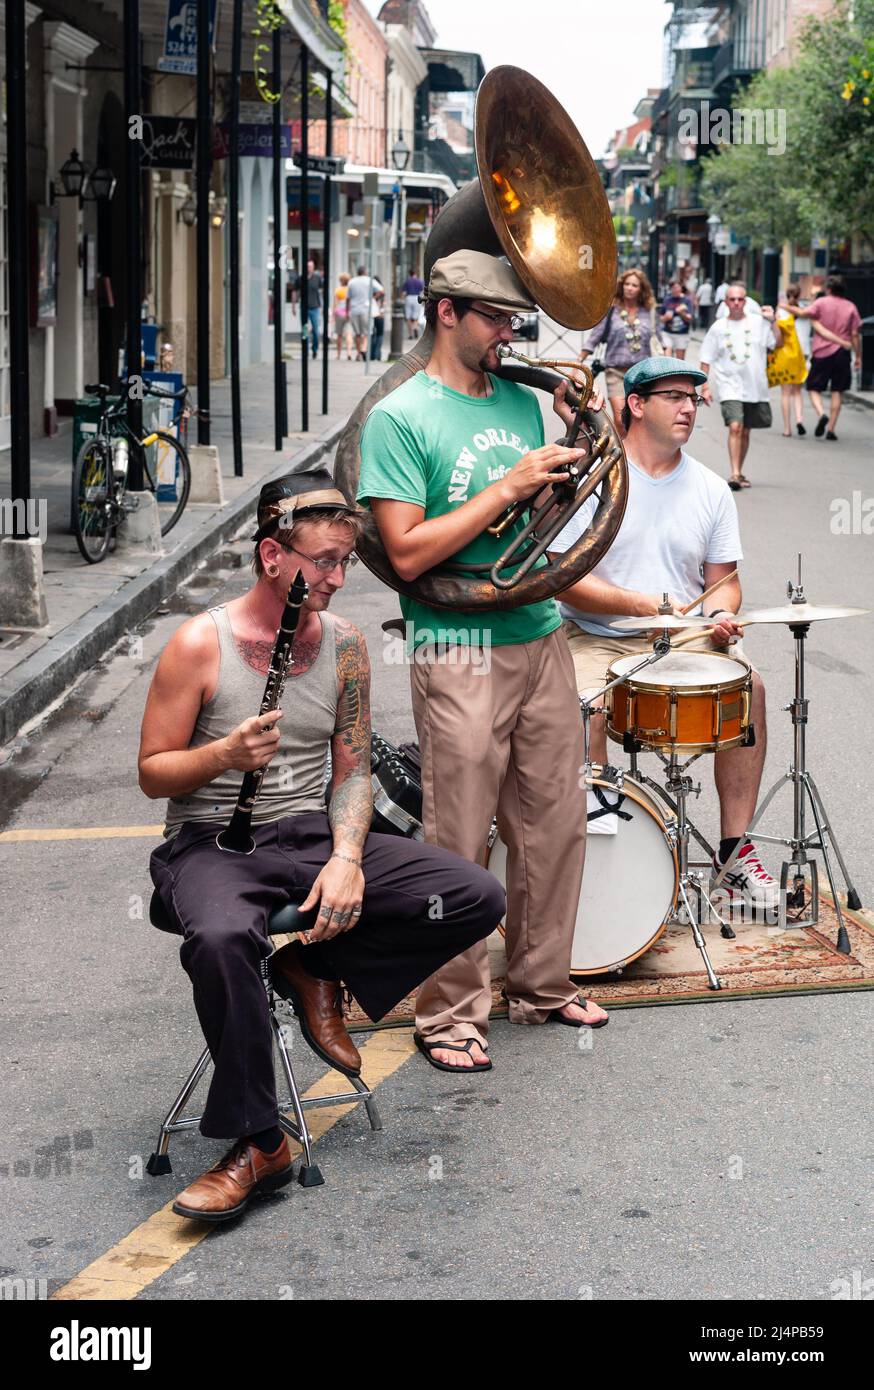 New Orleans, Louisiana, United States - July 17 2009: Jazz Band with Sousaphone, Clarinet, and Drums Playing Outdoors on Bourbon Street. Stock Photo